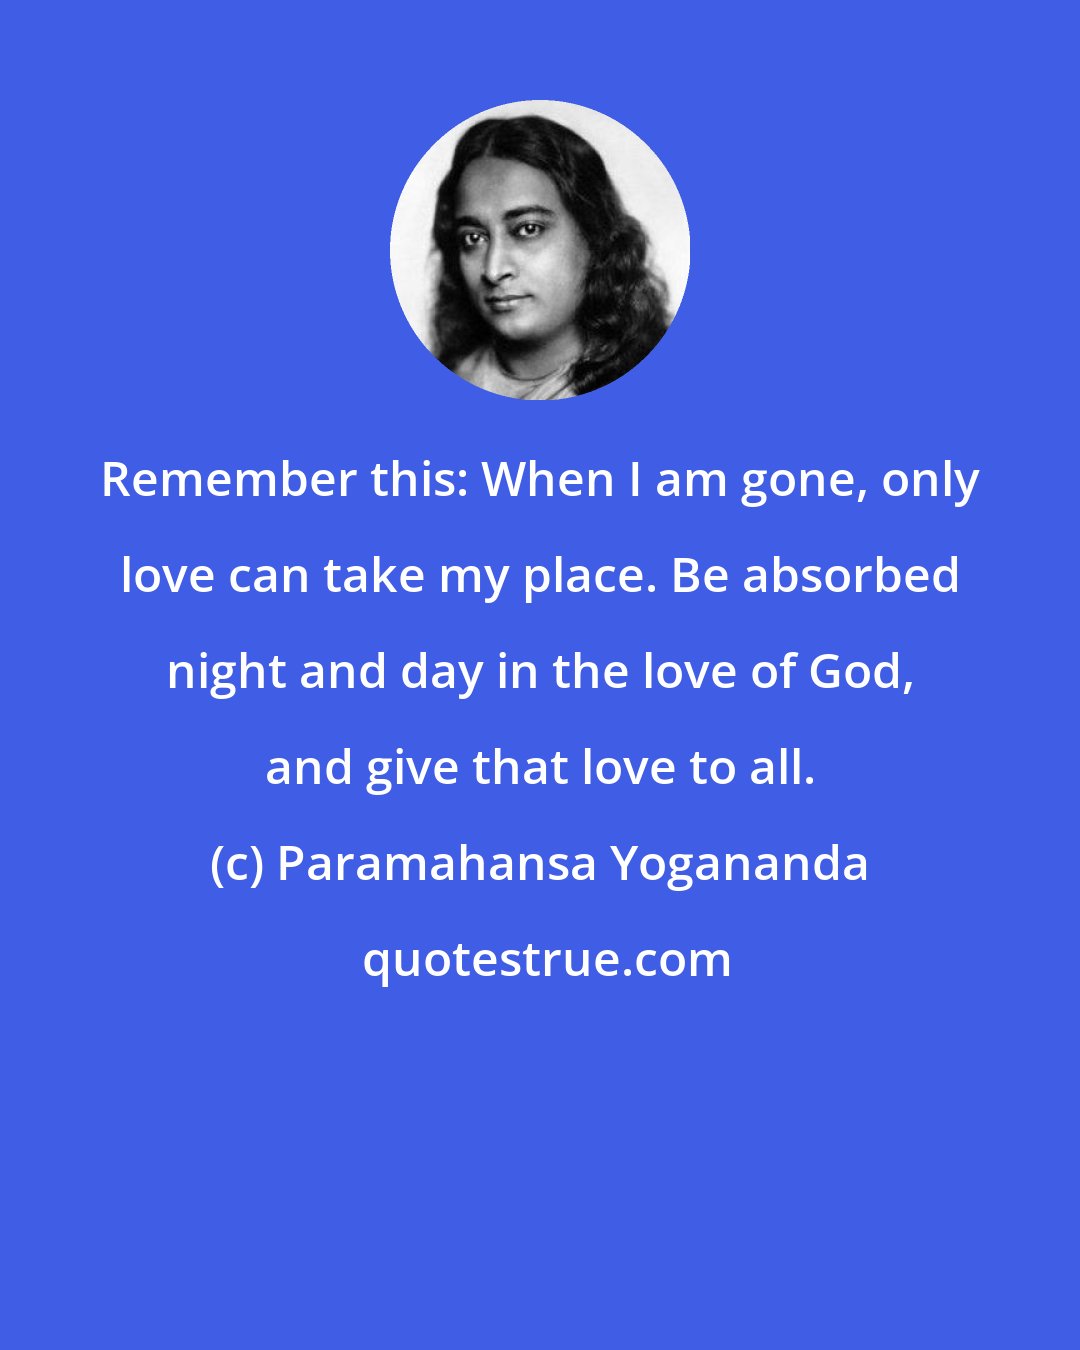 Paramahansa Yogananda: Remember this: When I am gone, only love can take my place. Be absorbed night and day in the love of God, and give that love to all.